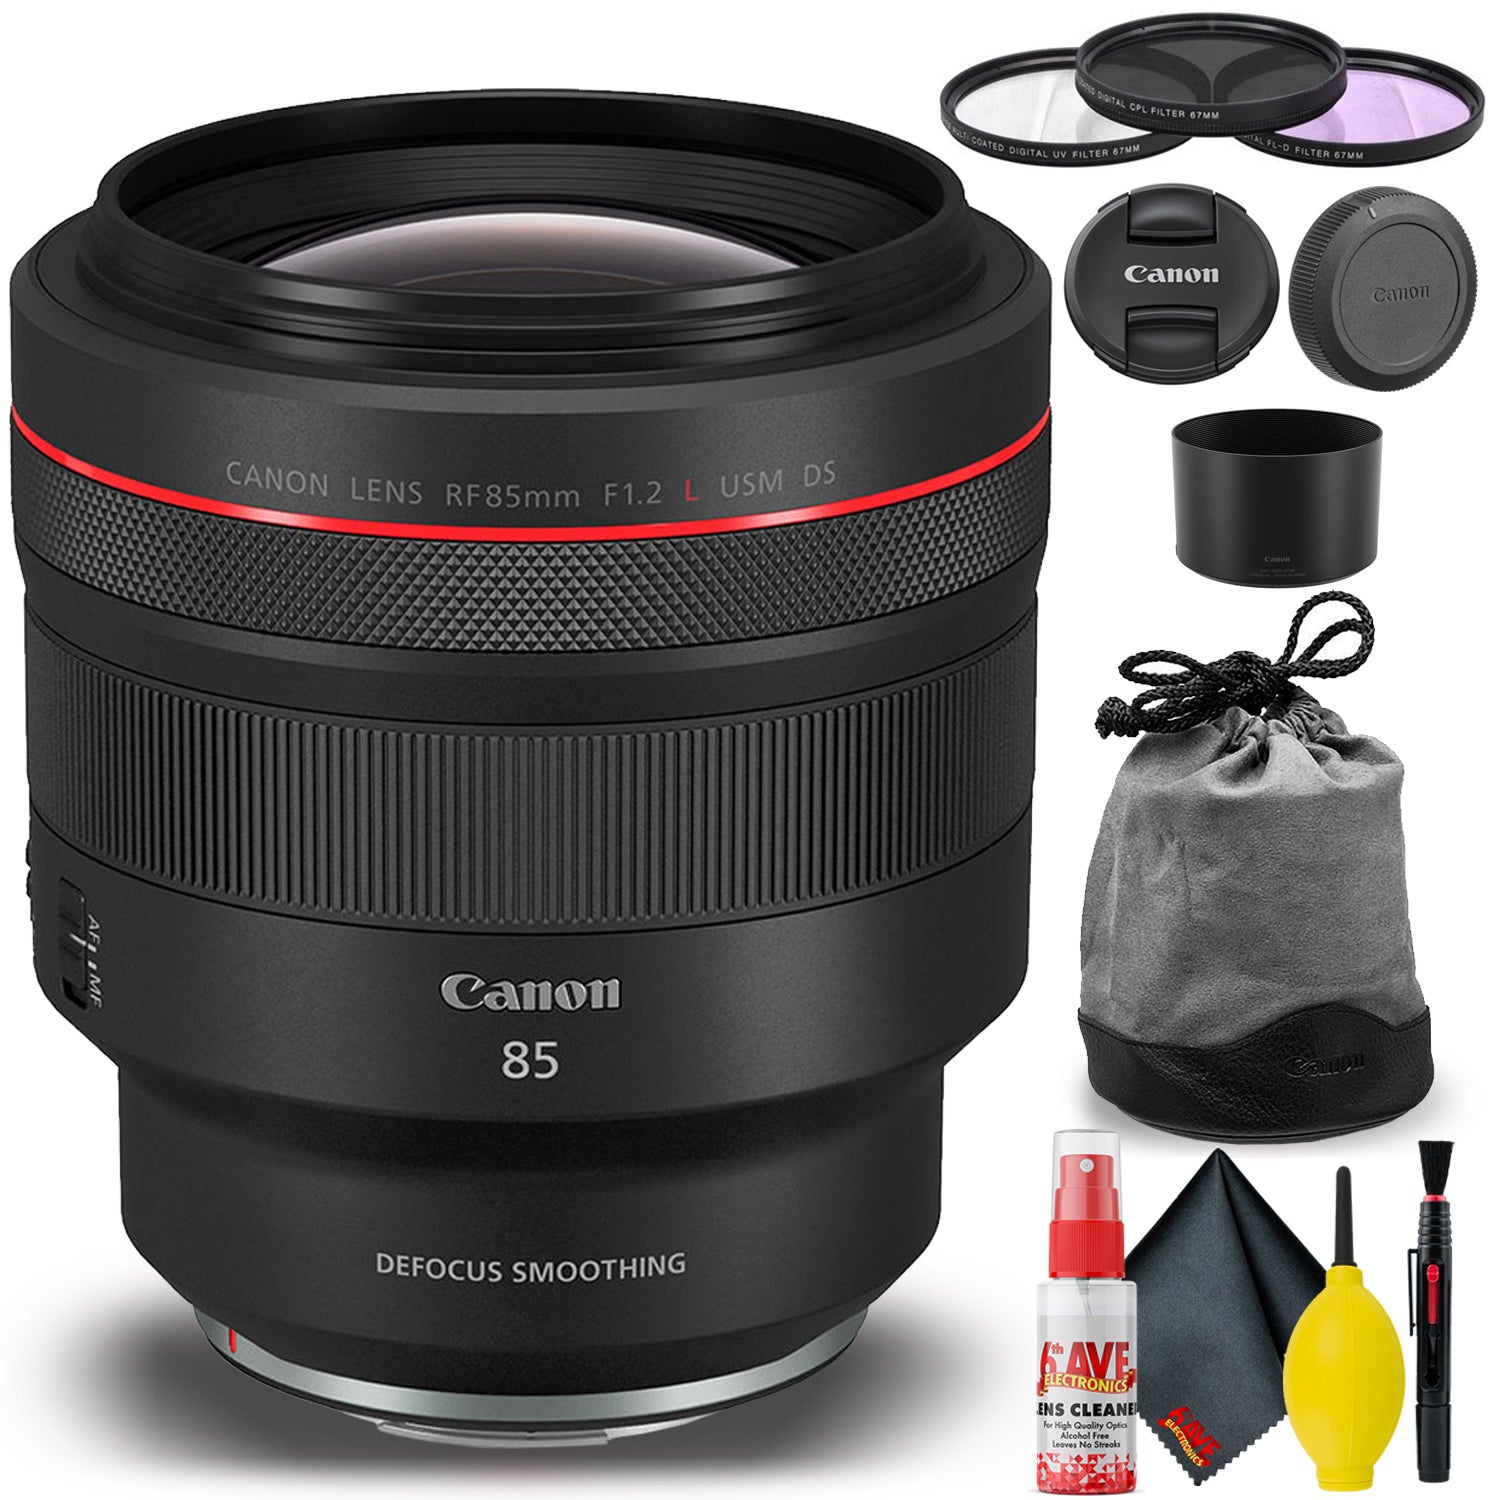 Canon RF 85mm f/1.2L USM DS Lens Bundle with Cleaning Kit and Filter Set